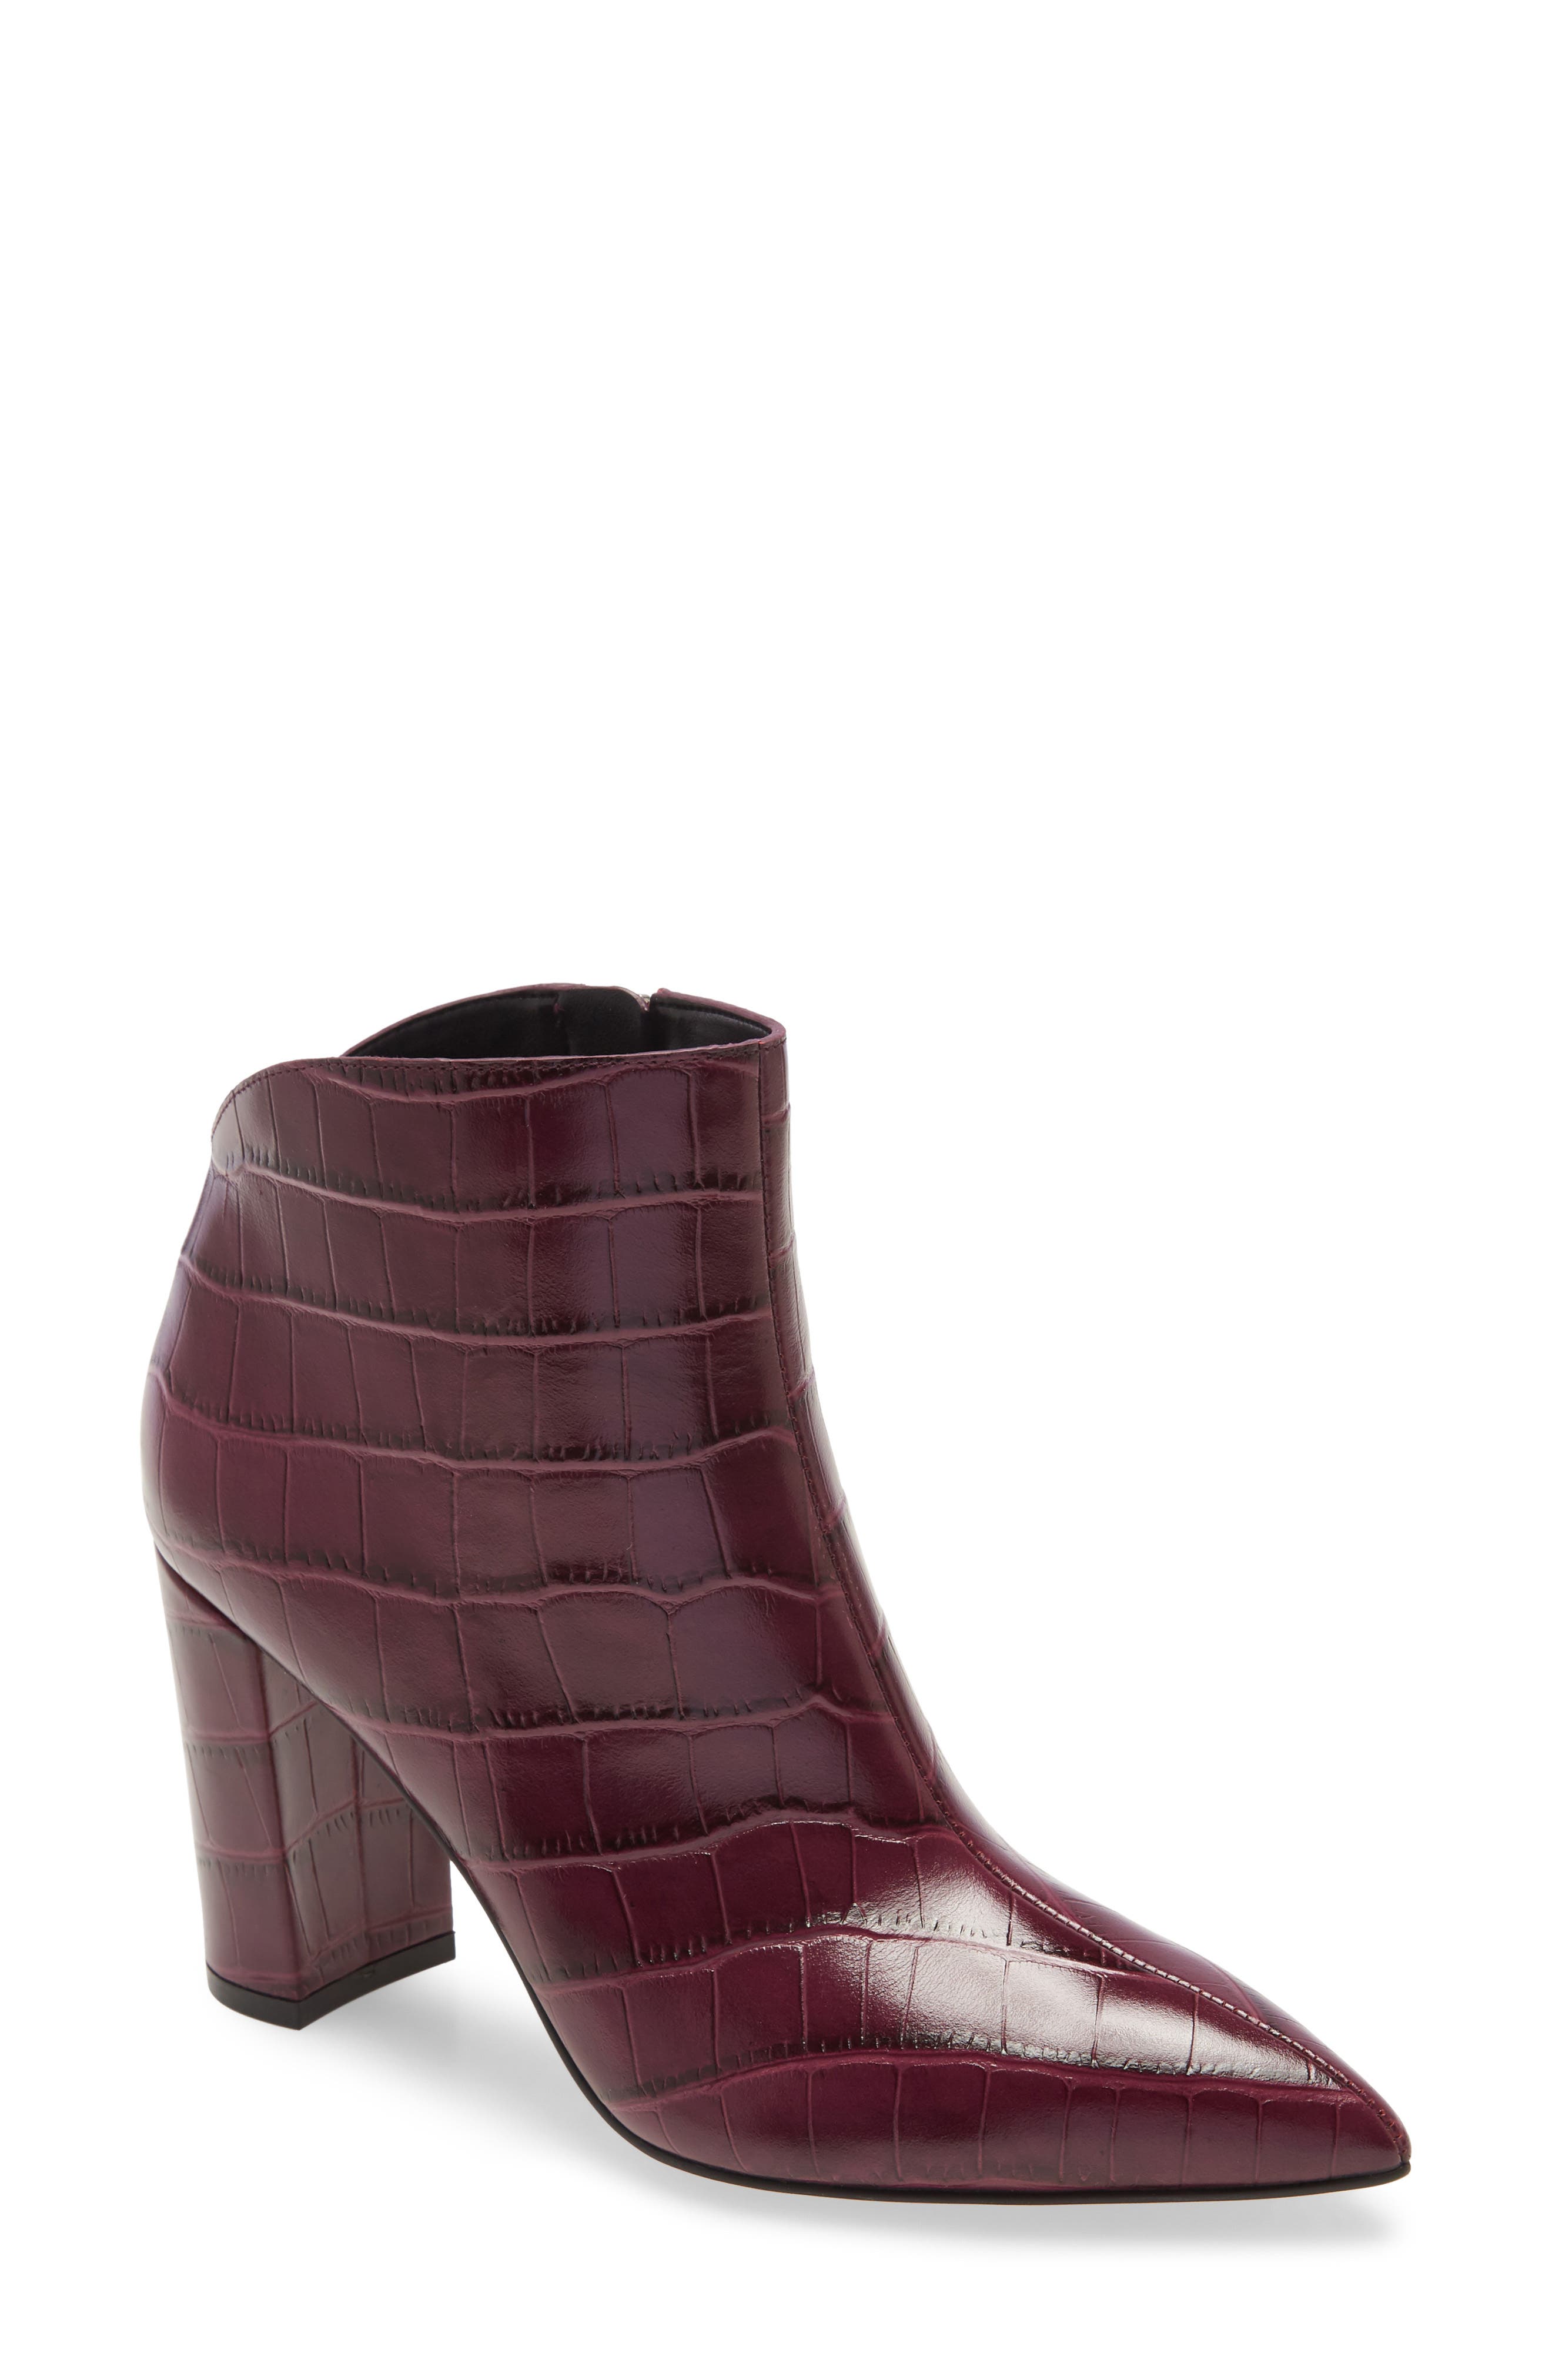 wine colored ankle booties